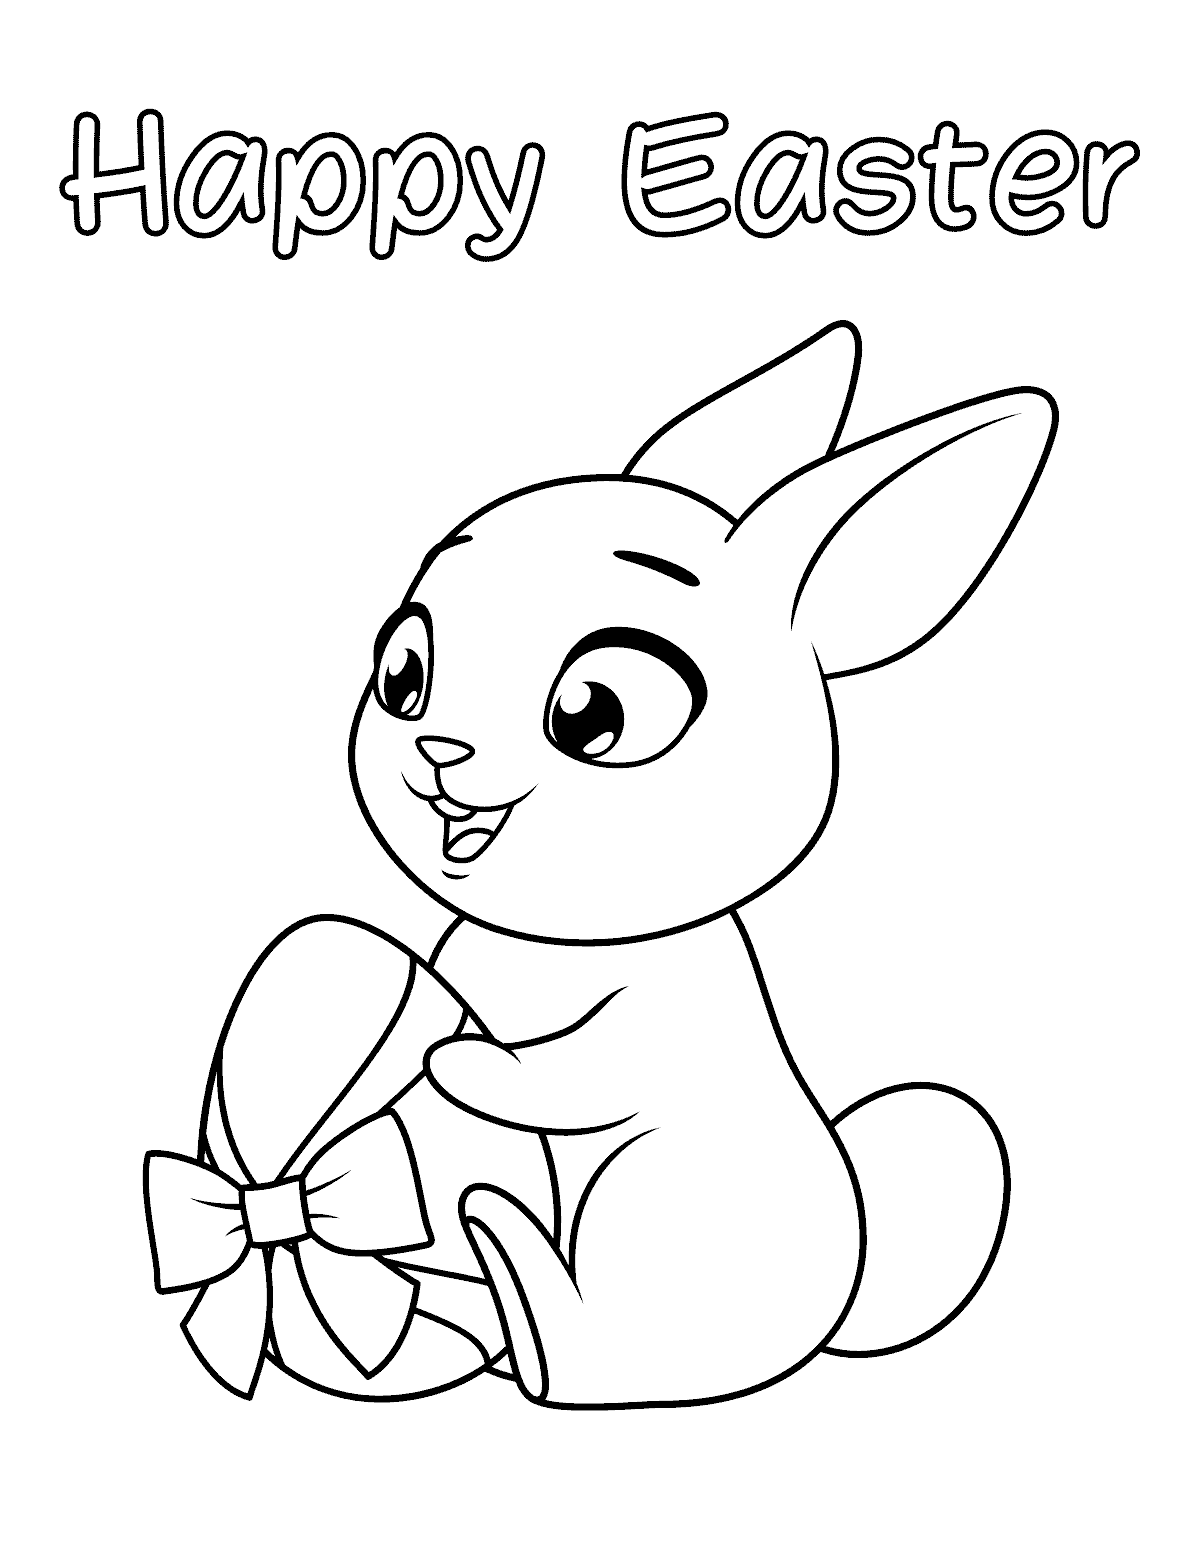 Easter Bunny with Egg and Bow Coloring Page